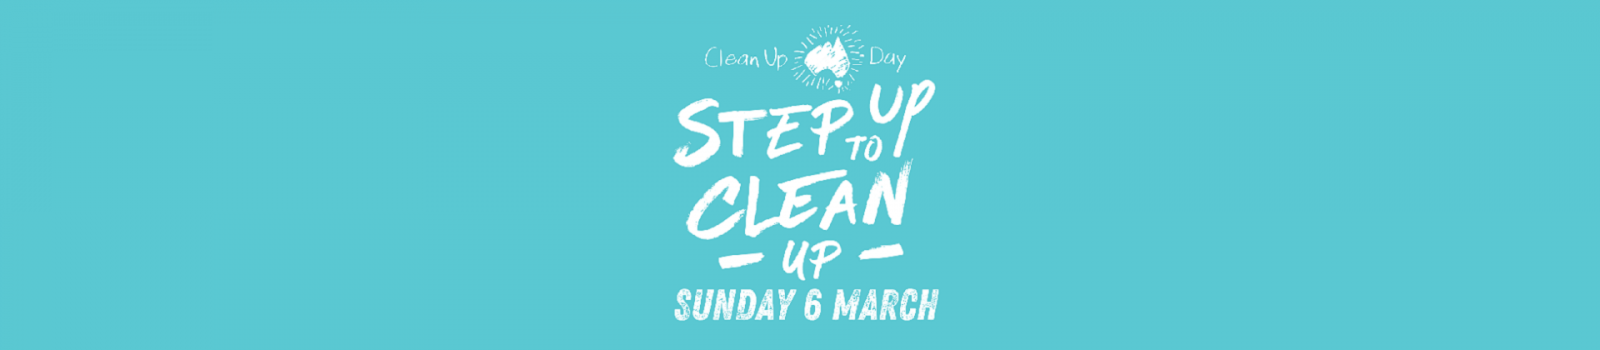 Clean Up Australia Day banner image